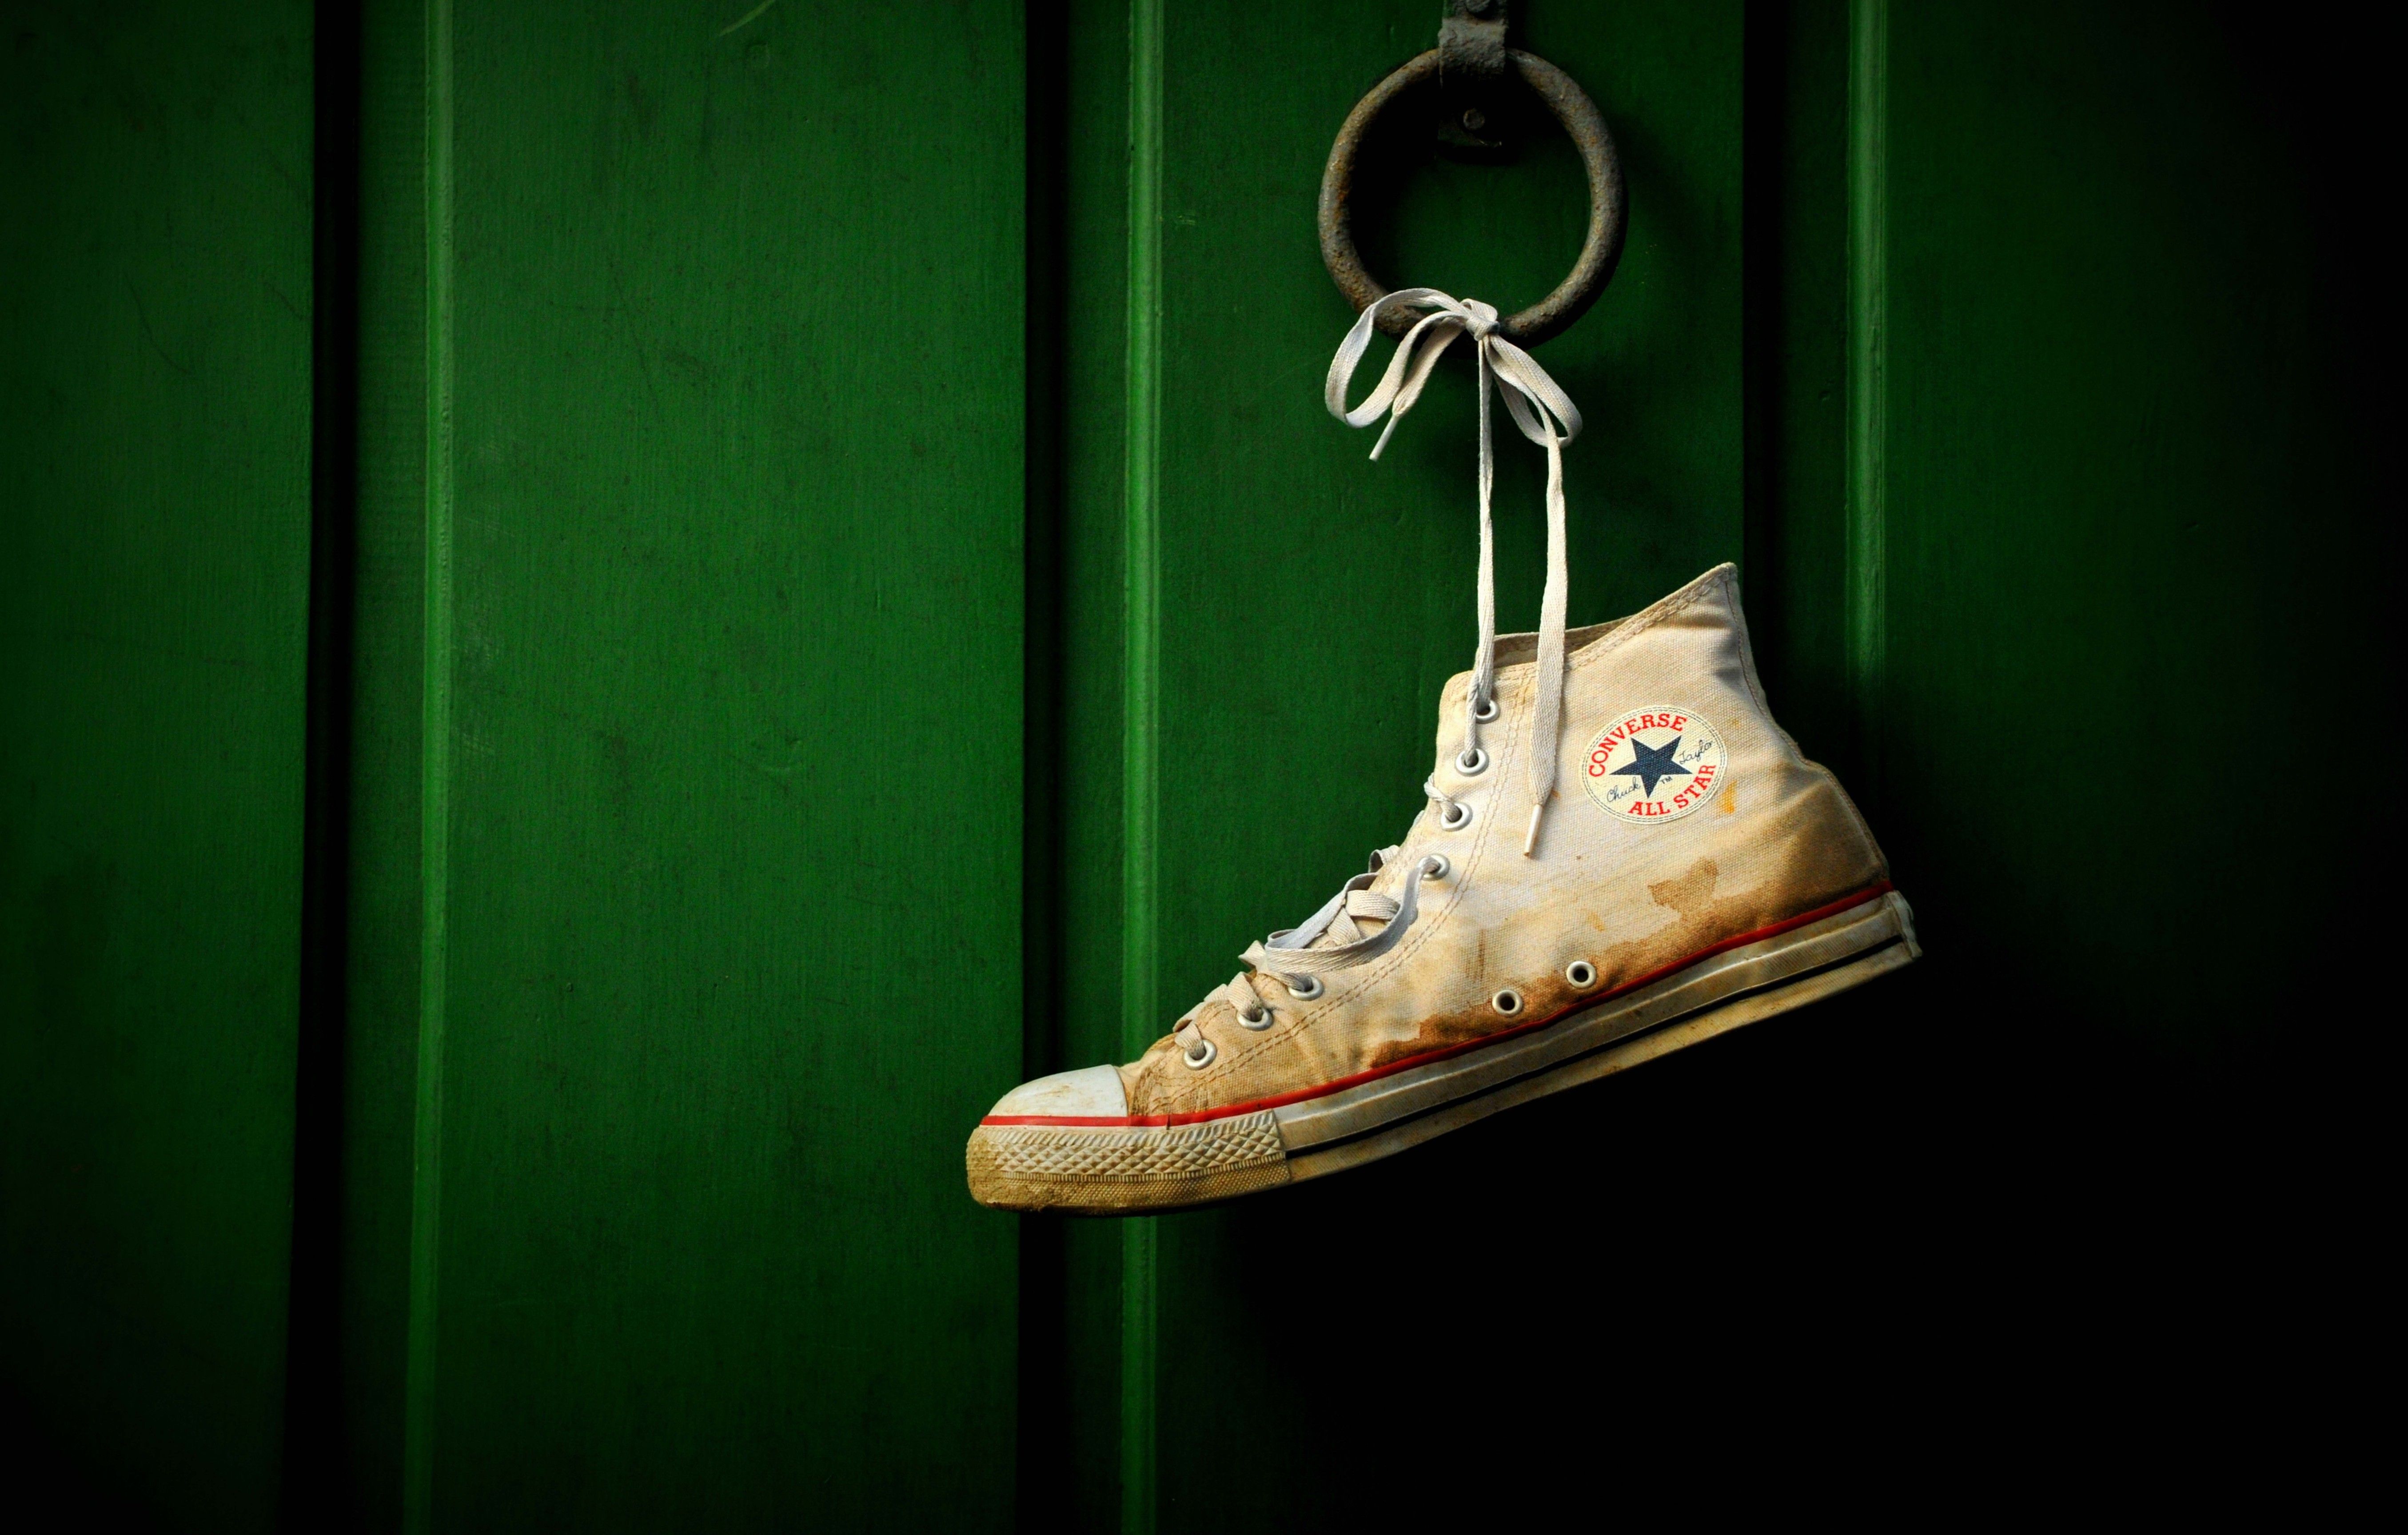 Converse all star green objects shoes wallpaper